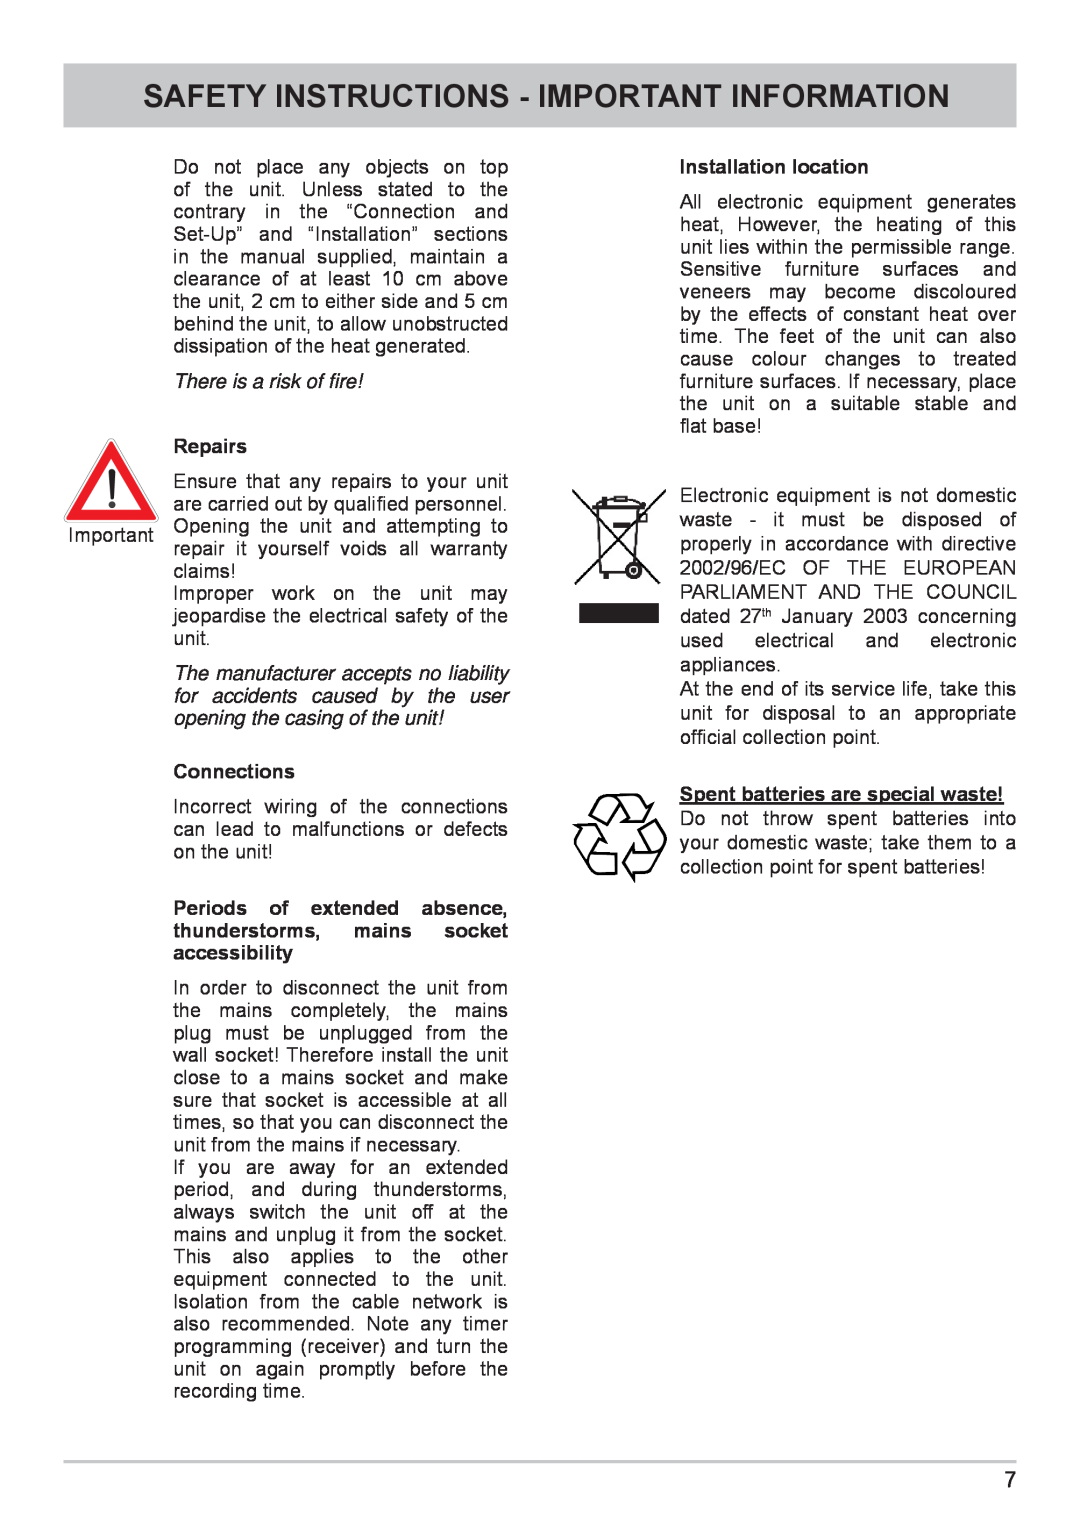 Kathrein UFC 662sw manual Safety Instructions - Important Information, There is a risk of ﬁre, Repairs, Connections 